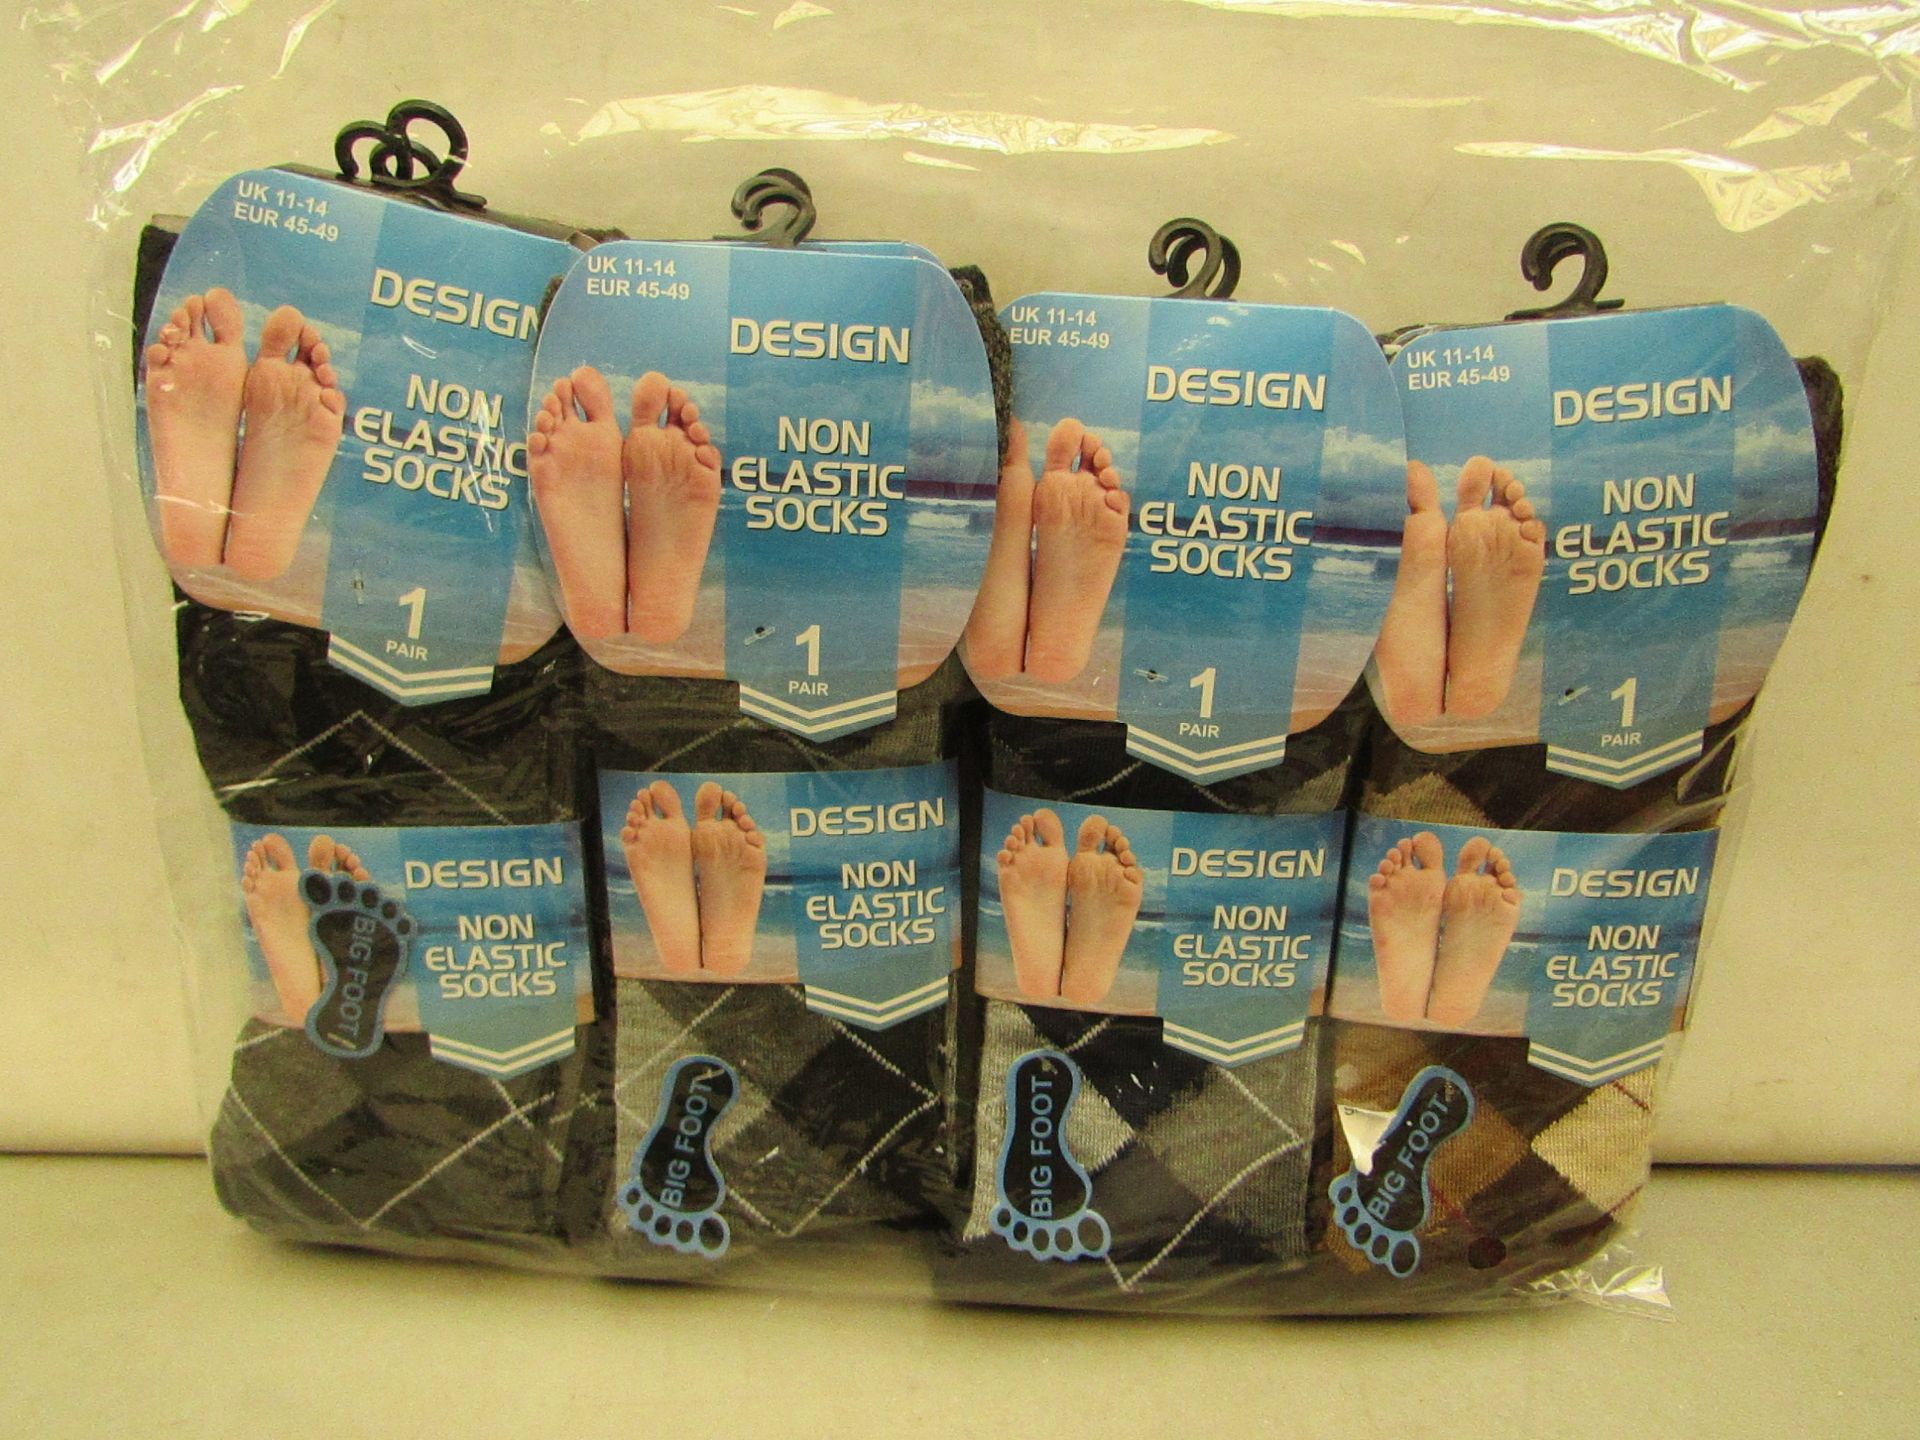 12 x pairs of Design Non Elastic Mens Big Foot Patterned Socks size 11-14 new & packaged